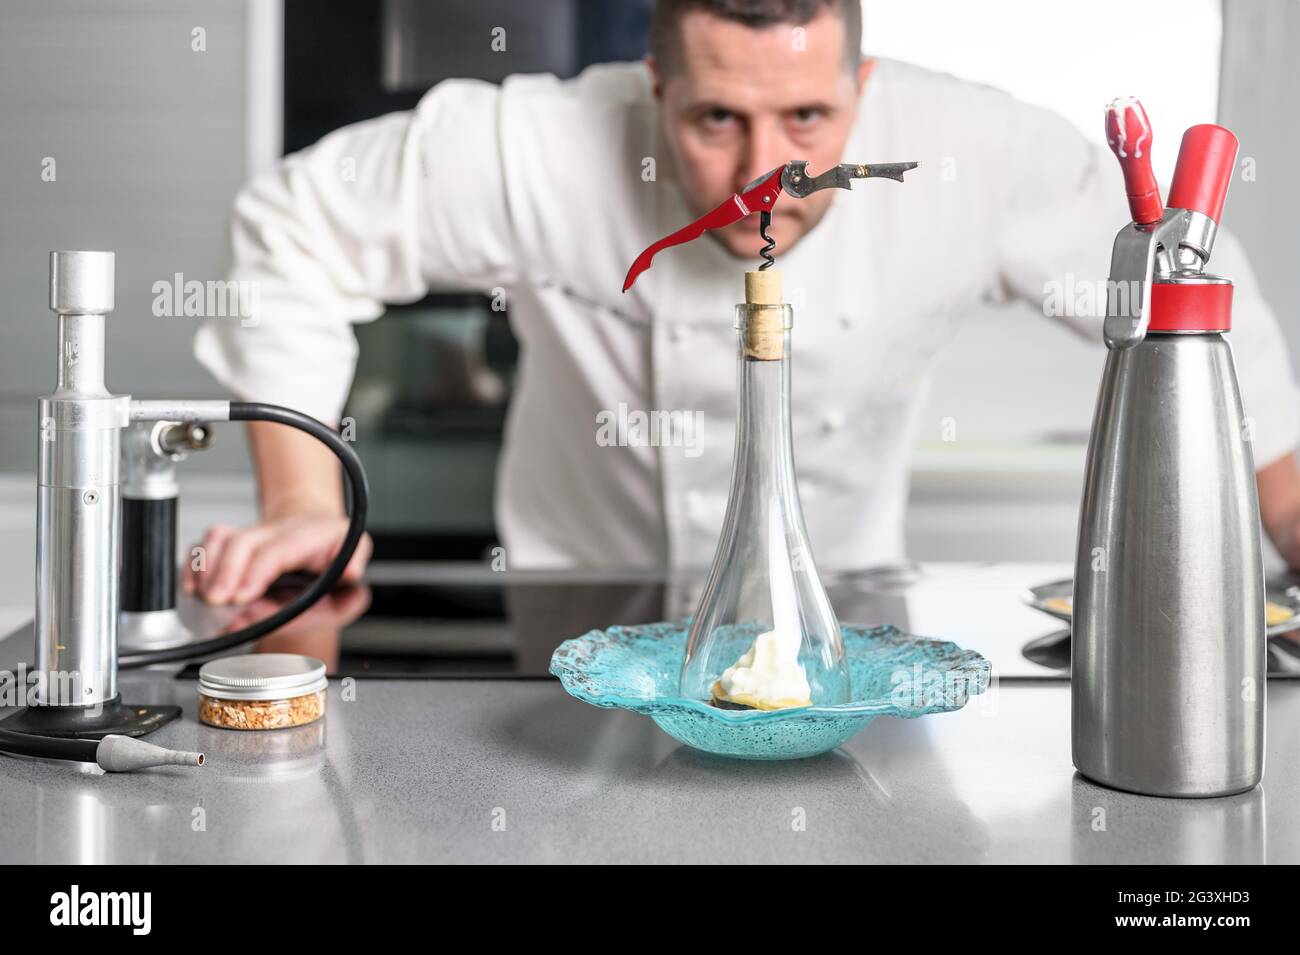 Concentrated at work. Portrait of professional chef working in restaurant kitchen. Stock Photo